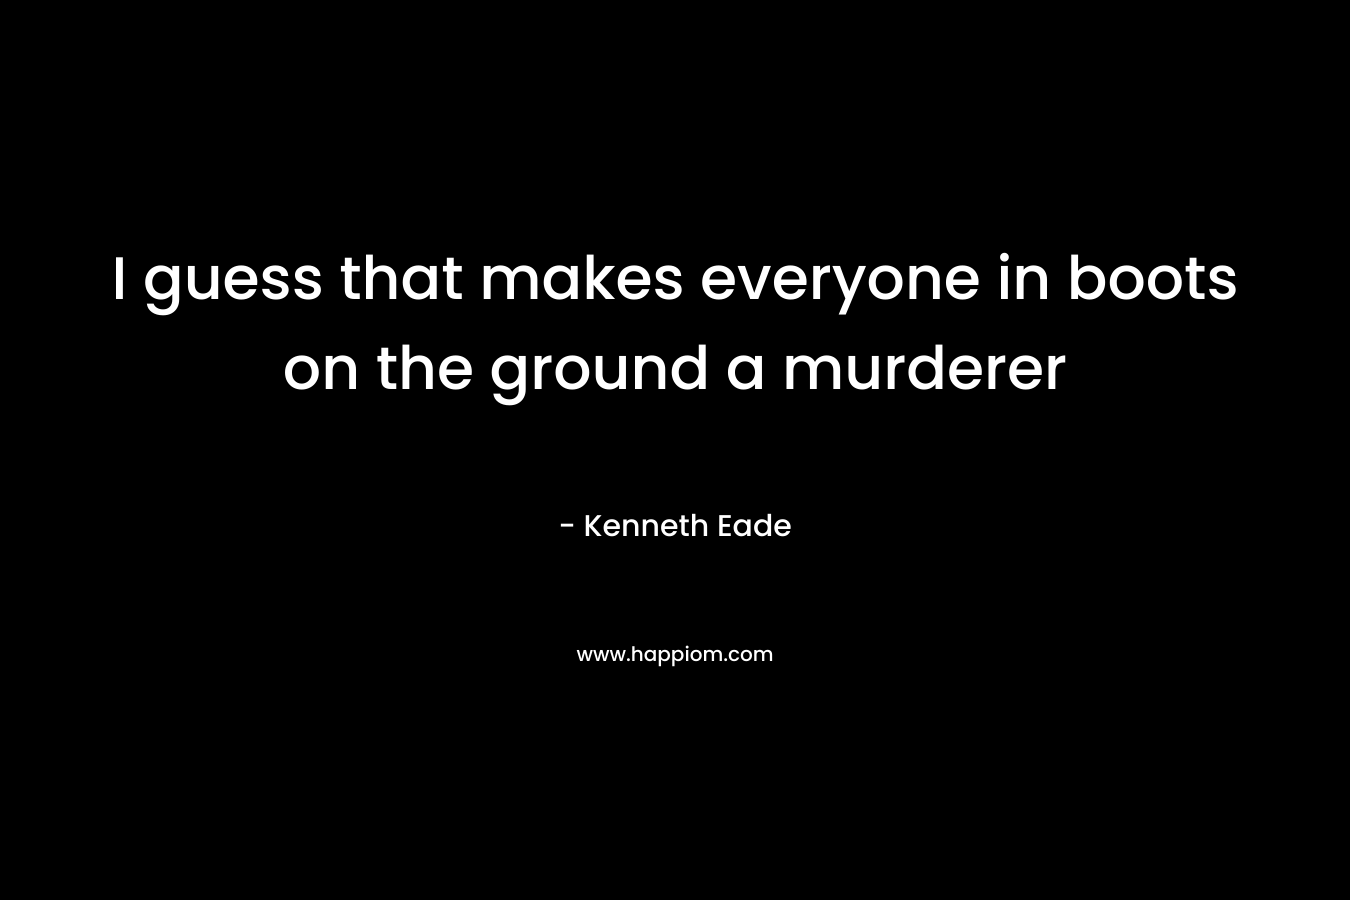 I guess that makes everyone in boots on the ground a murderer – Kenneth Eade